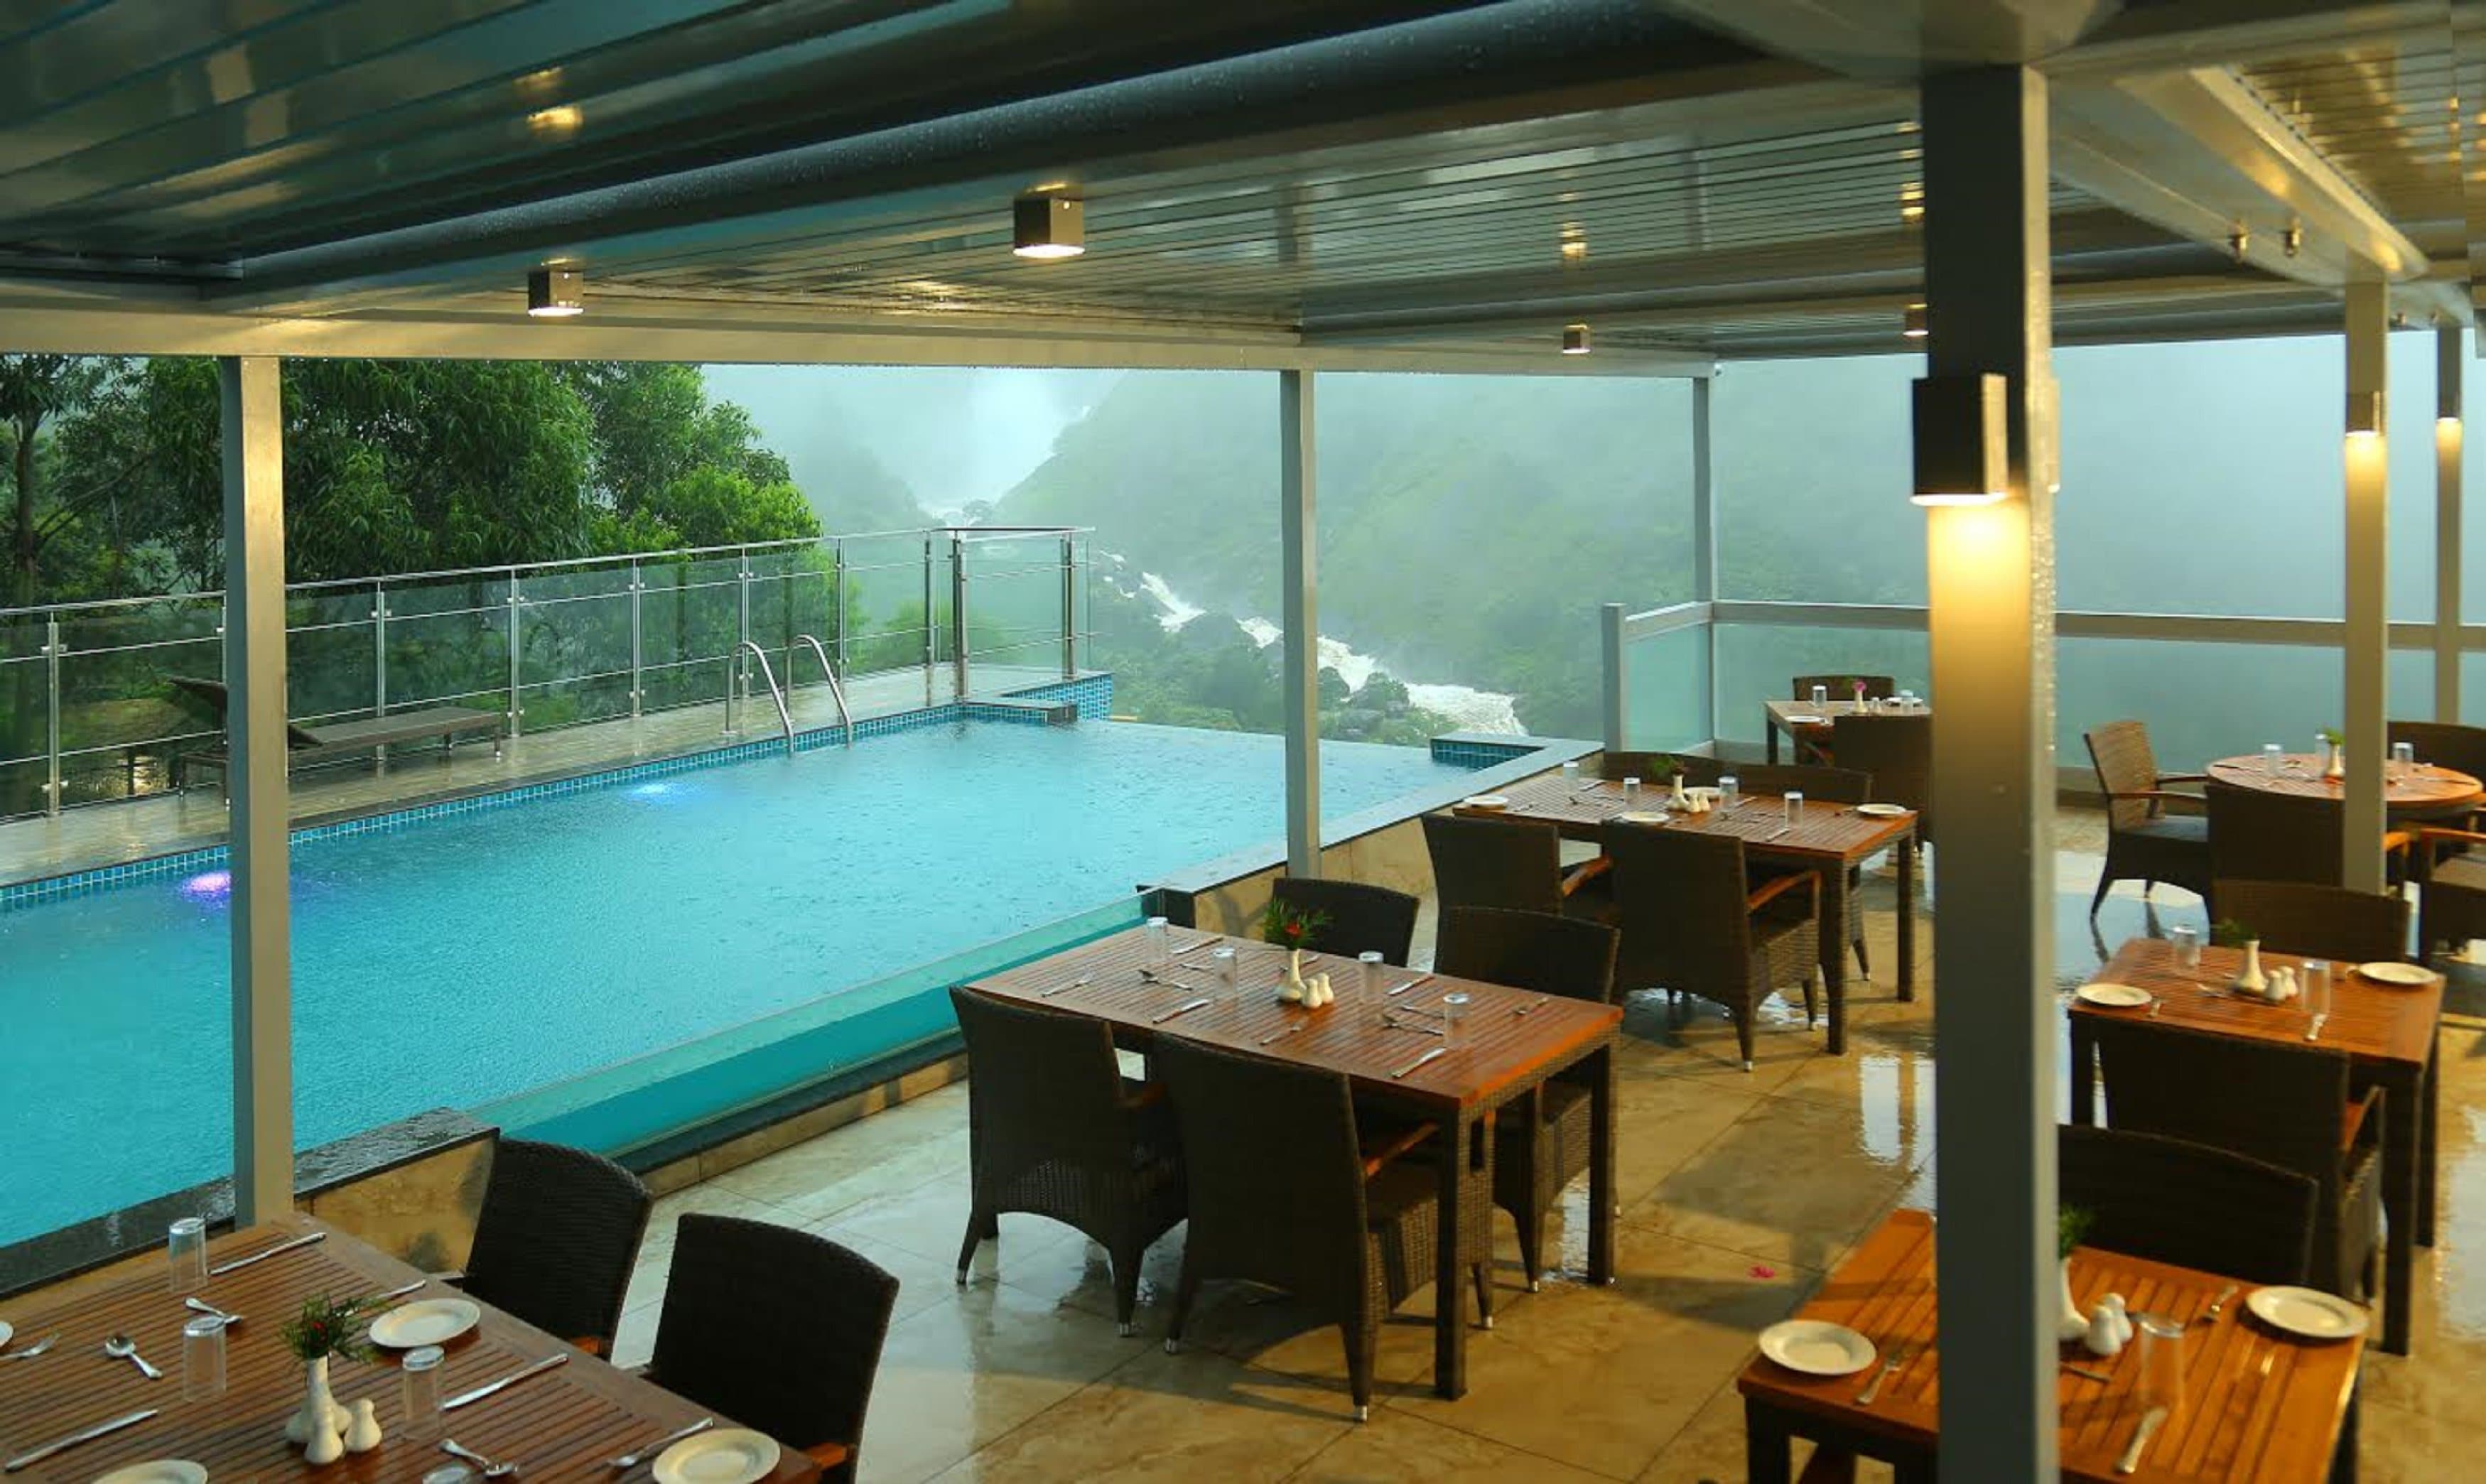 Top 10 Luxury Hotels with a Swimming Pool and Spa in India